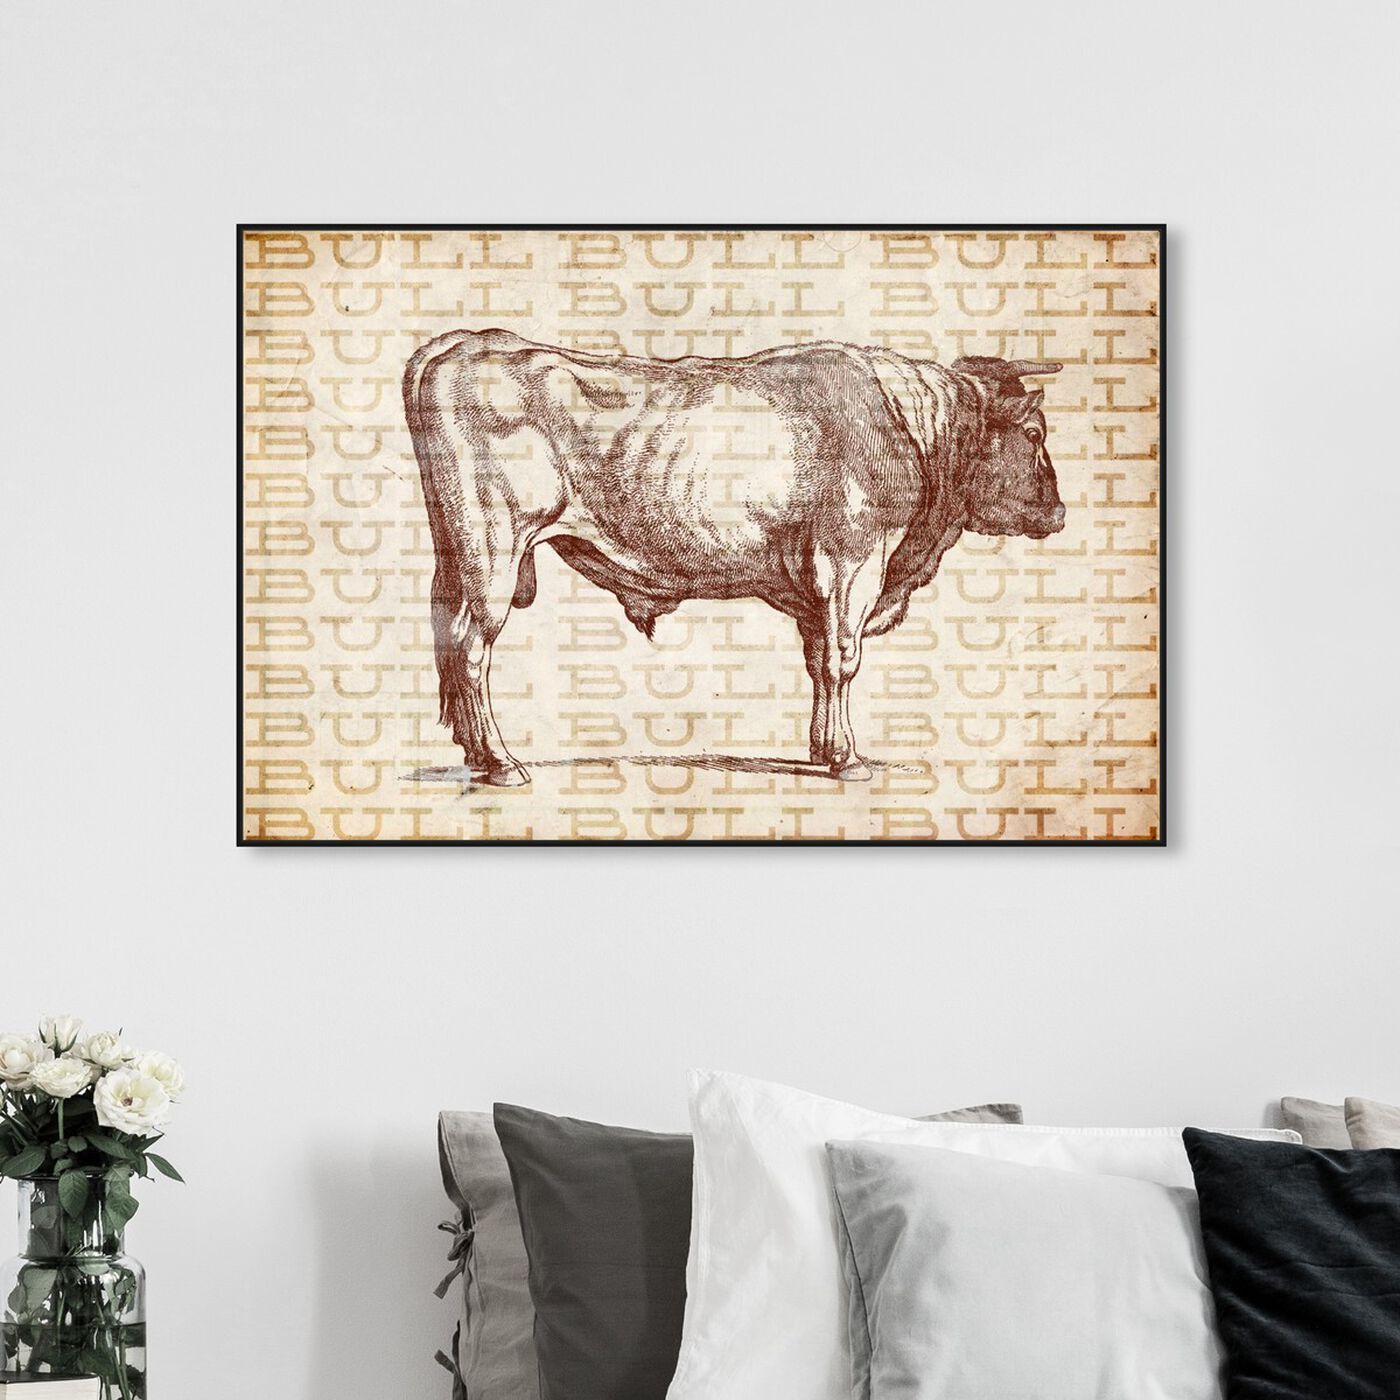 Hanging view of Bull featuring animals and farm animals art.